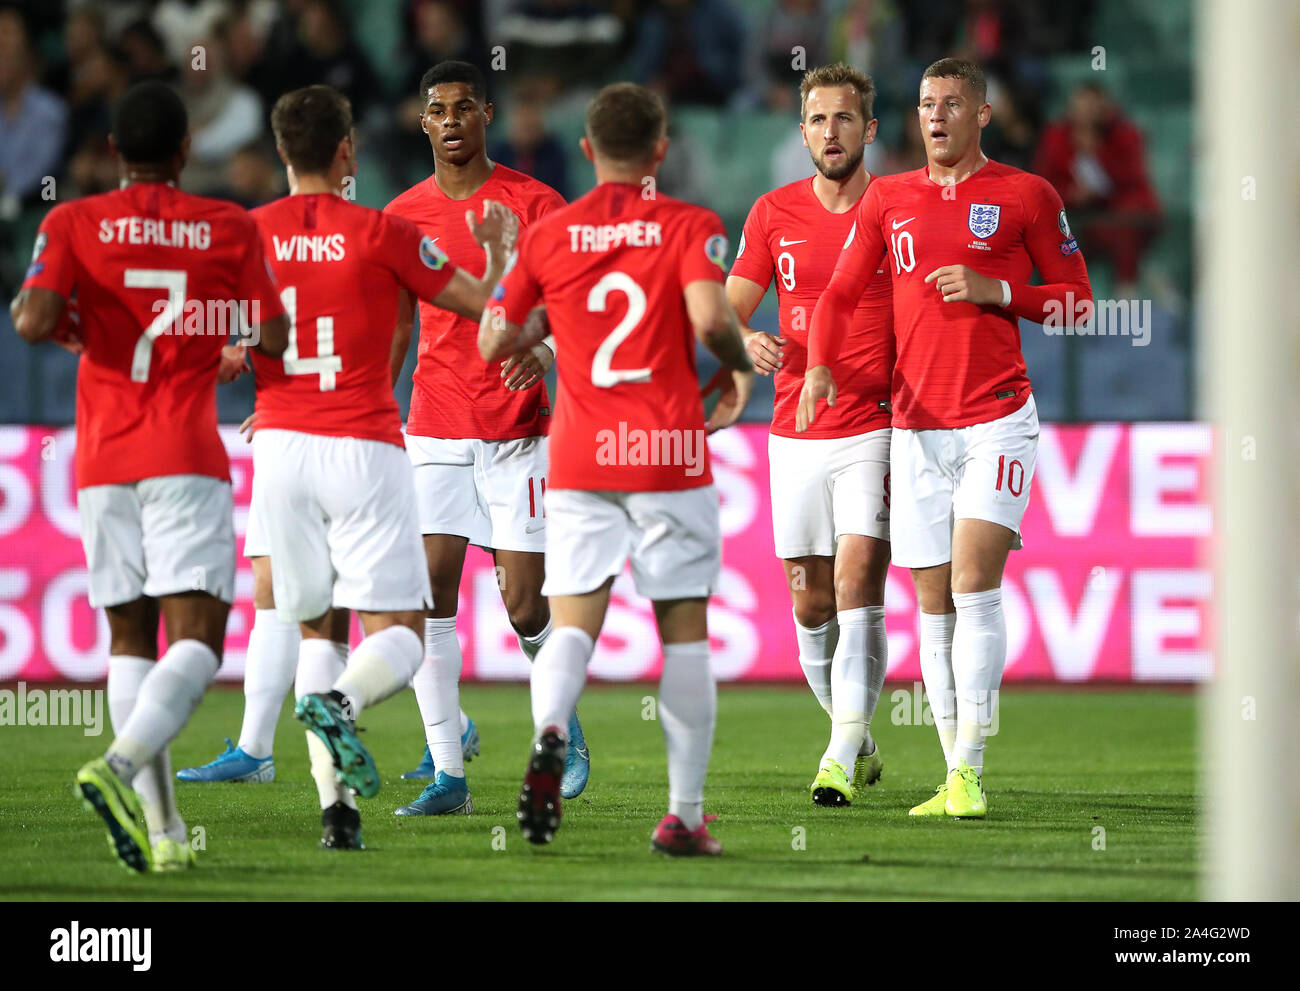 England's Ross Barkley (right) celebrates scoring his side's second goal of the game with team mates during the UEFA Euro 2020 Qualifying match at the Vasil Levski National Stadium, Sofia, Bulgaria. Stock Photo